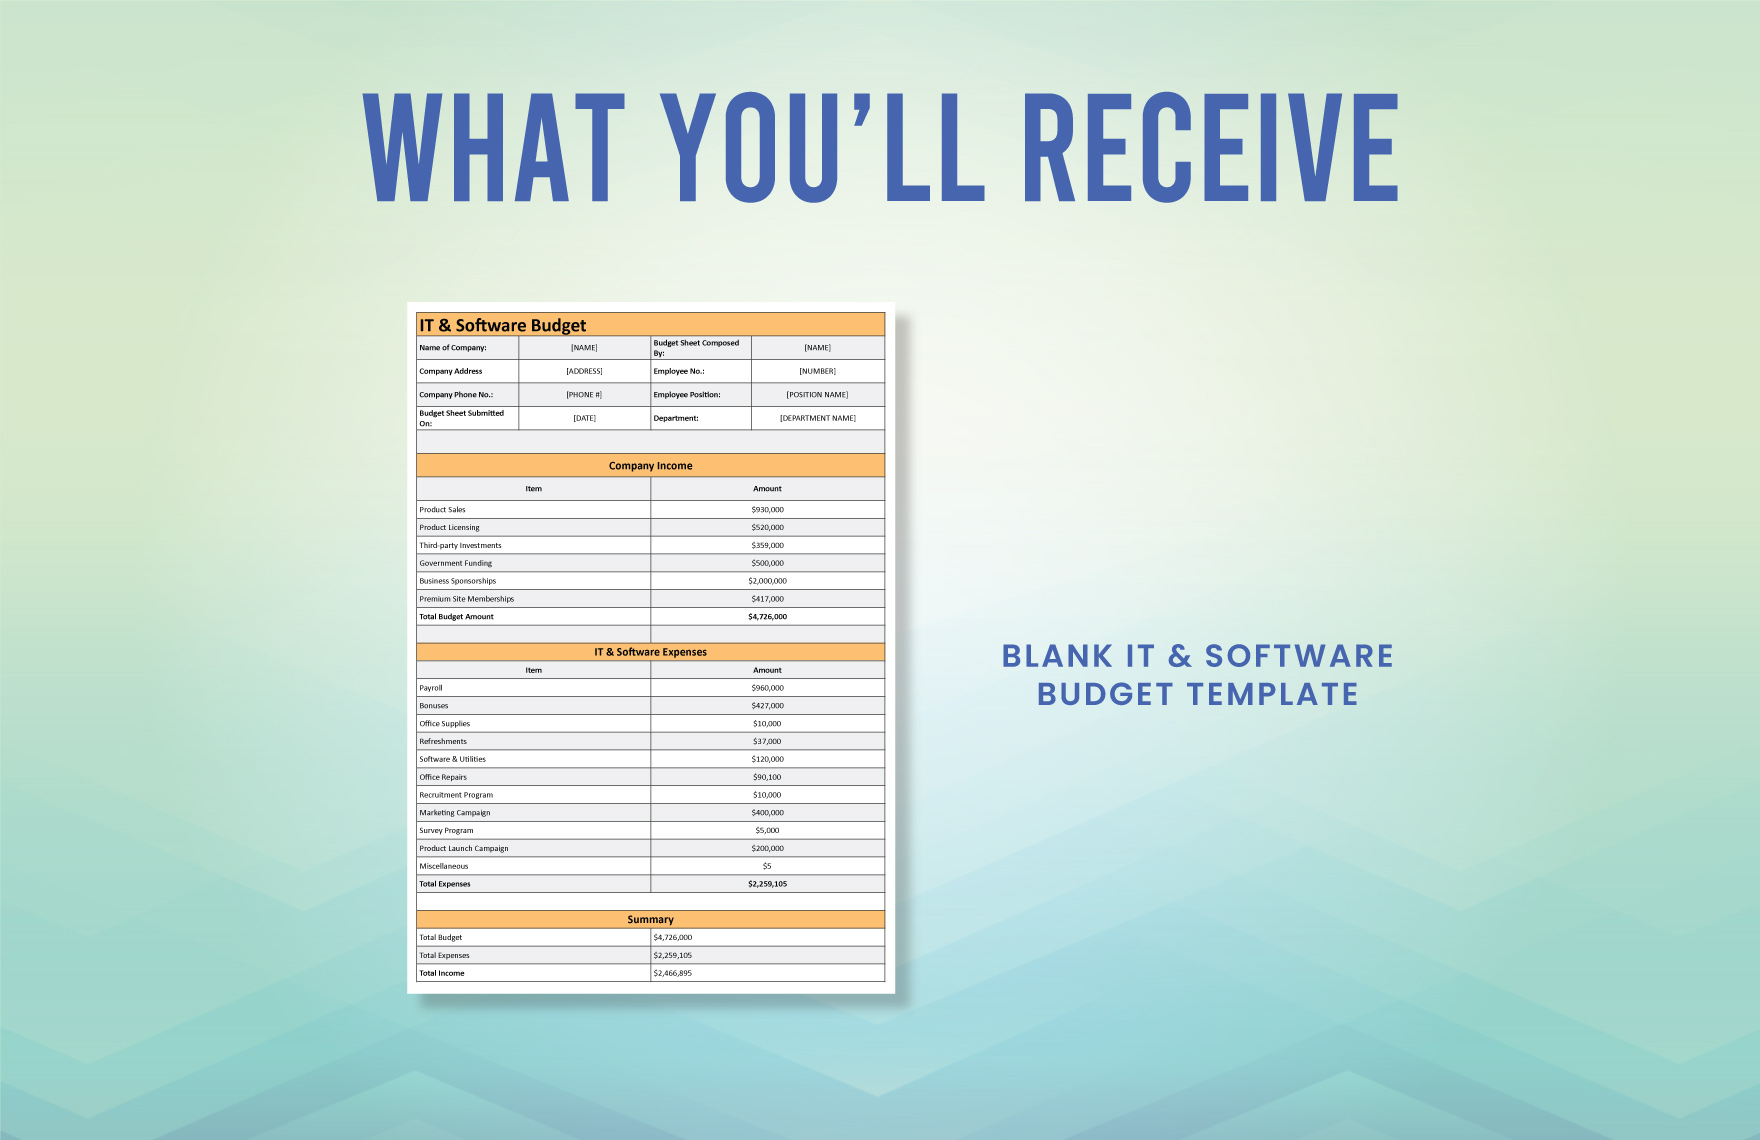 Blank IT & Software Budget Template